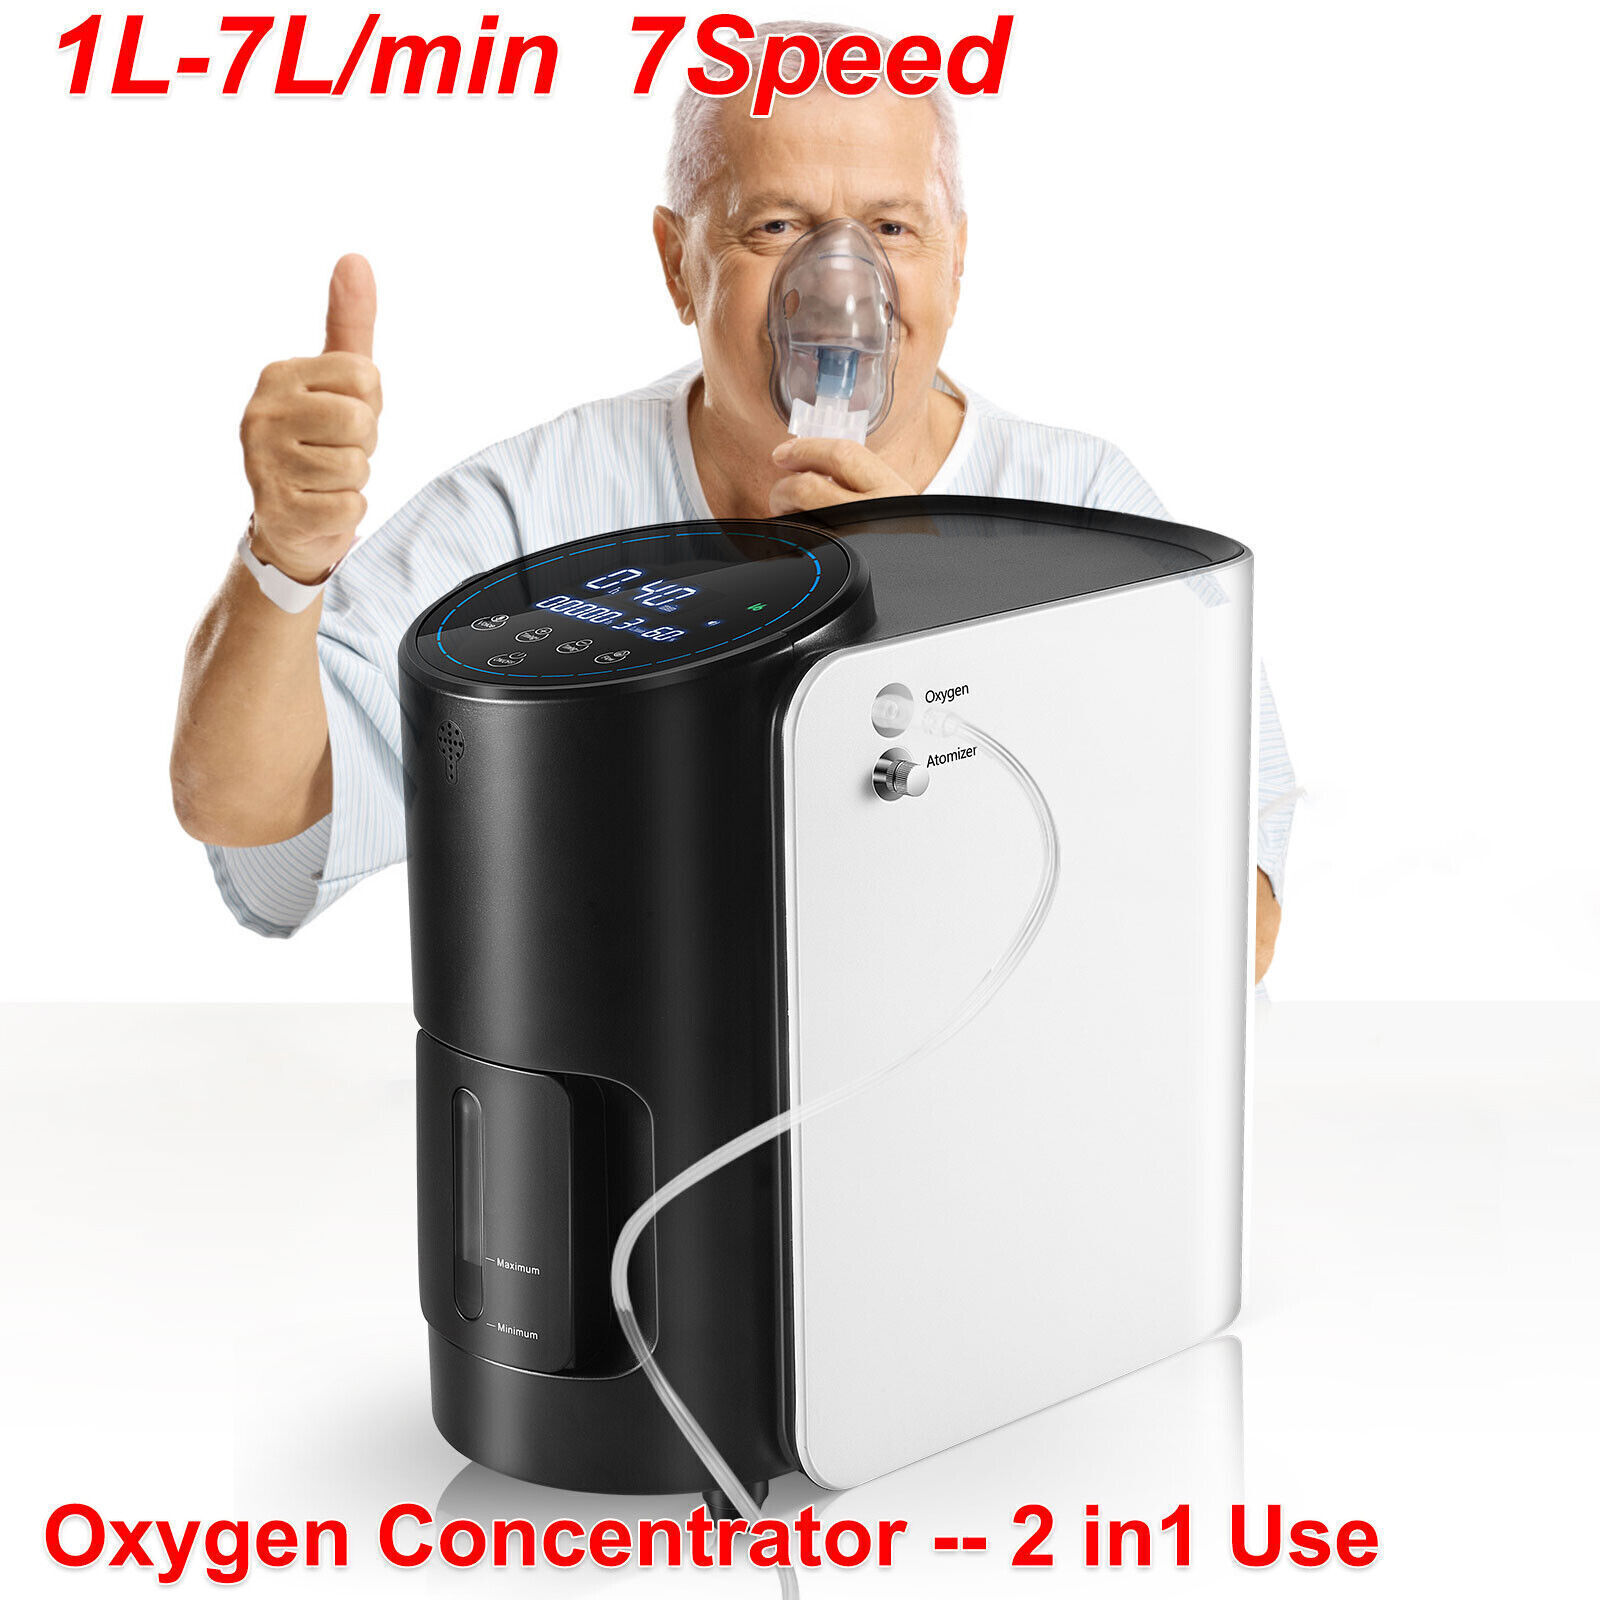 Adjustable 1-7L 30-95% Ox𝚢Ge𝚗-Ç𝟶ncnetrato𝚛 Timer 2in1 for Home Office &Sleep